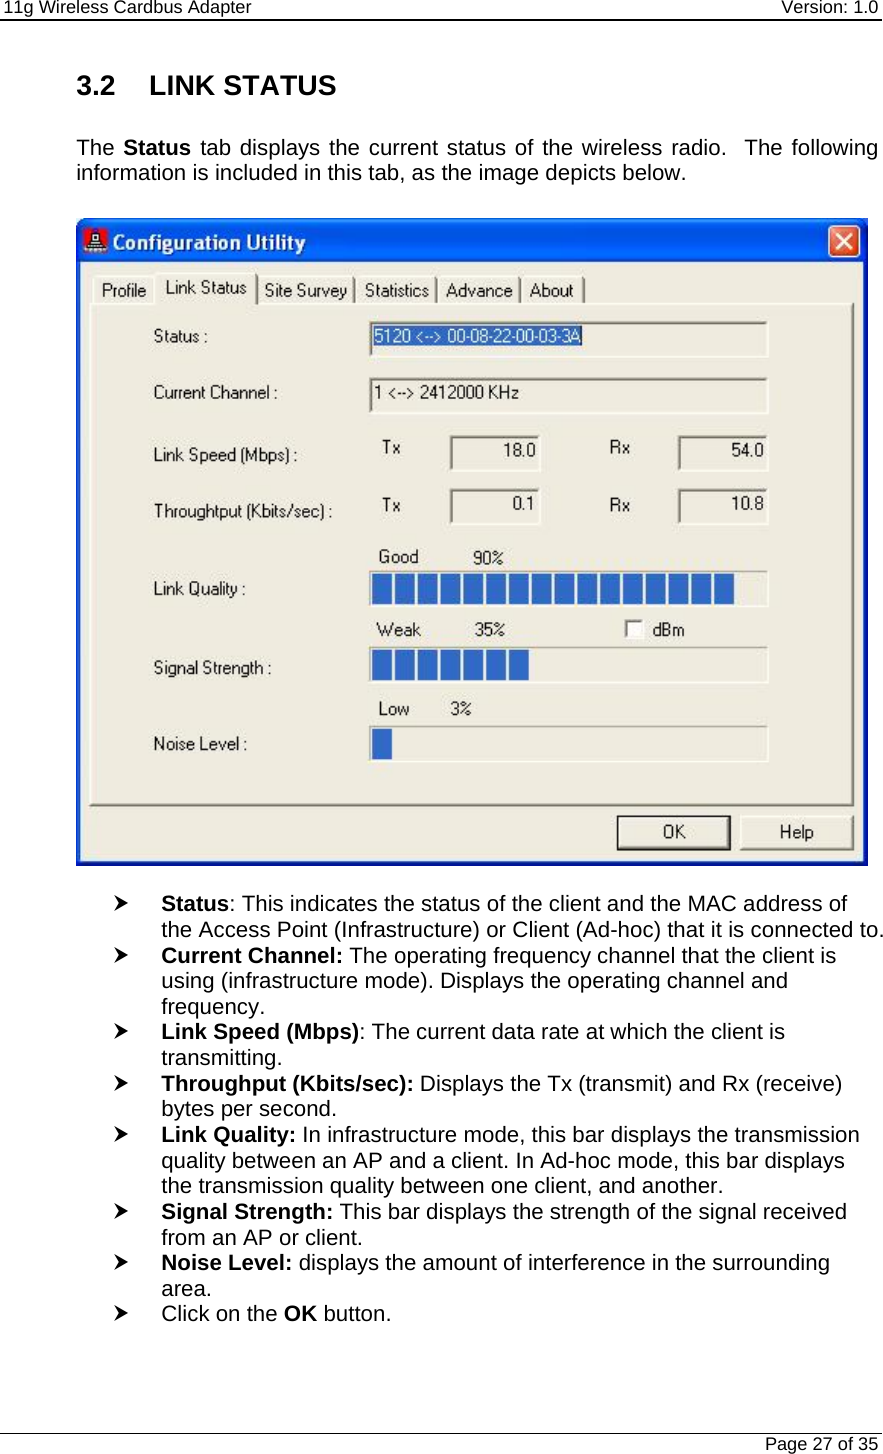 11g Wireless Cardbus Adapter    Version: 1.0   Page 27 of 35 3.2 LINK STATUS  The Status tab displays the current status of the wireless radio.  The following information is included in this tab, as the image depicts below.    h Status: This indicates the status of the client and the MAC address of the Access Point (Infrastructure) or Client (Ad-hoc) that it is connected to.  h Current Channel: The operating frequency channel that the client is using (infrastructure mode). Displays the operating channel and frequency.  h Link Speed (Mbps): The current data rate at which the client is transmitting. h Throughput (Kbits/sec): Displays the Tx (transmit) and Rx (receive) bytes per second. h Link Quality: In infrastructure mode, this bar displays the transmission quality between an AP and a client. In Ad-hoc mode, this bar displays the transmission quality between one client, and another. h Signal Strength: This bar displays the strength of the signal received from an AP or client. h Noise Level: displays the amount of interference in the surrounding area.   h Click on the OK button. 